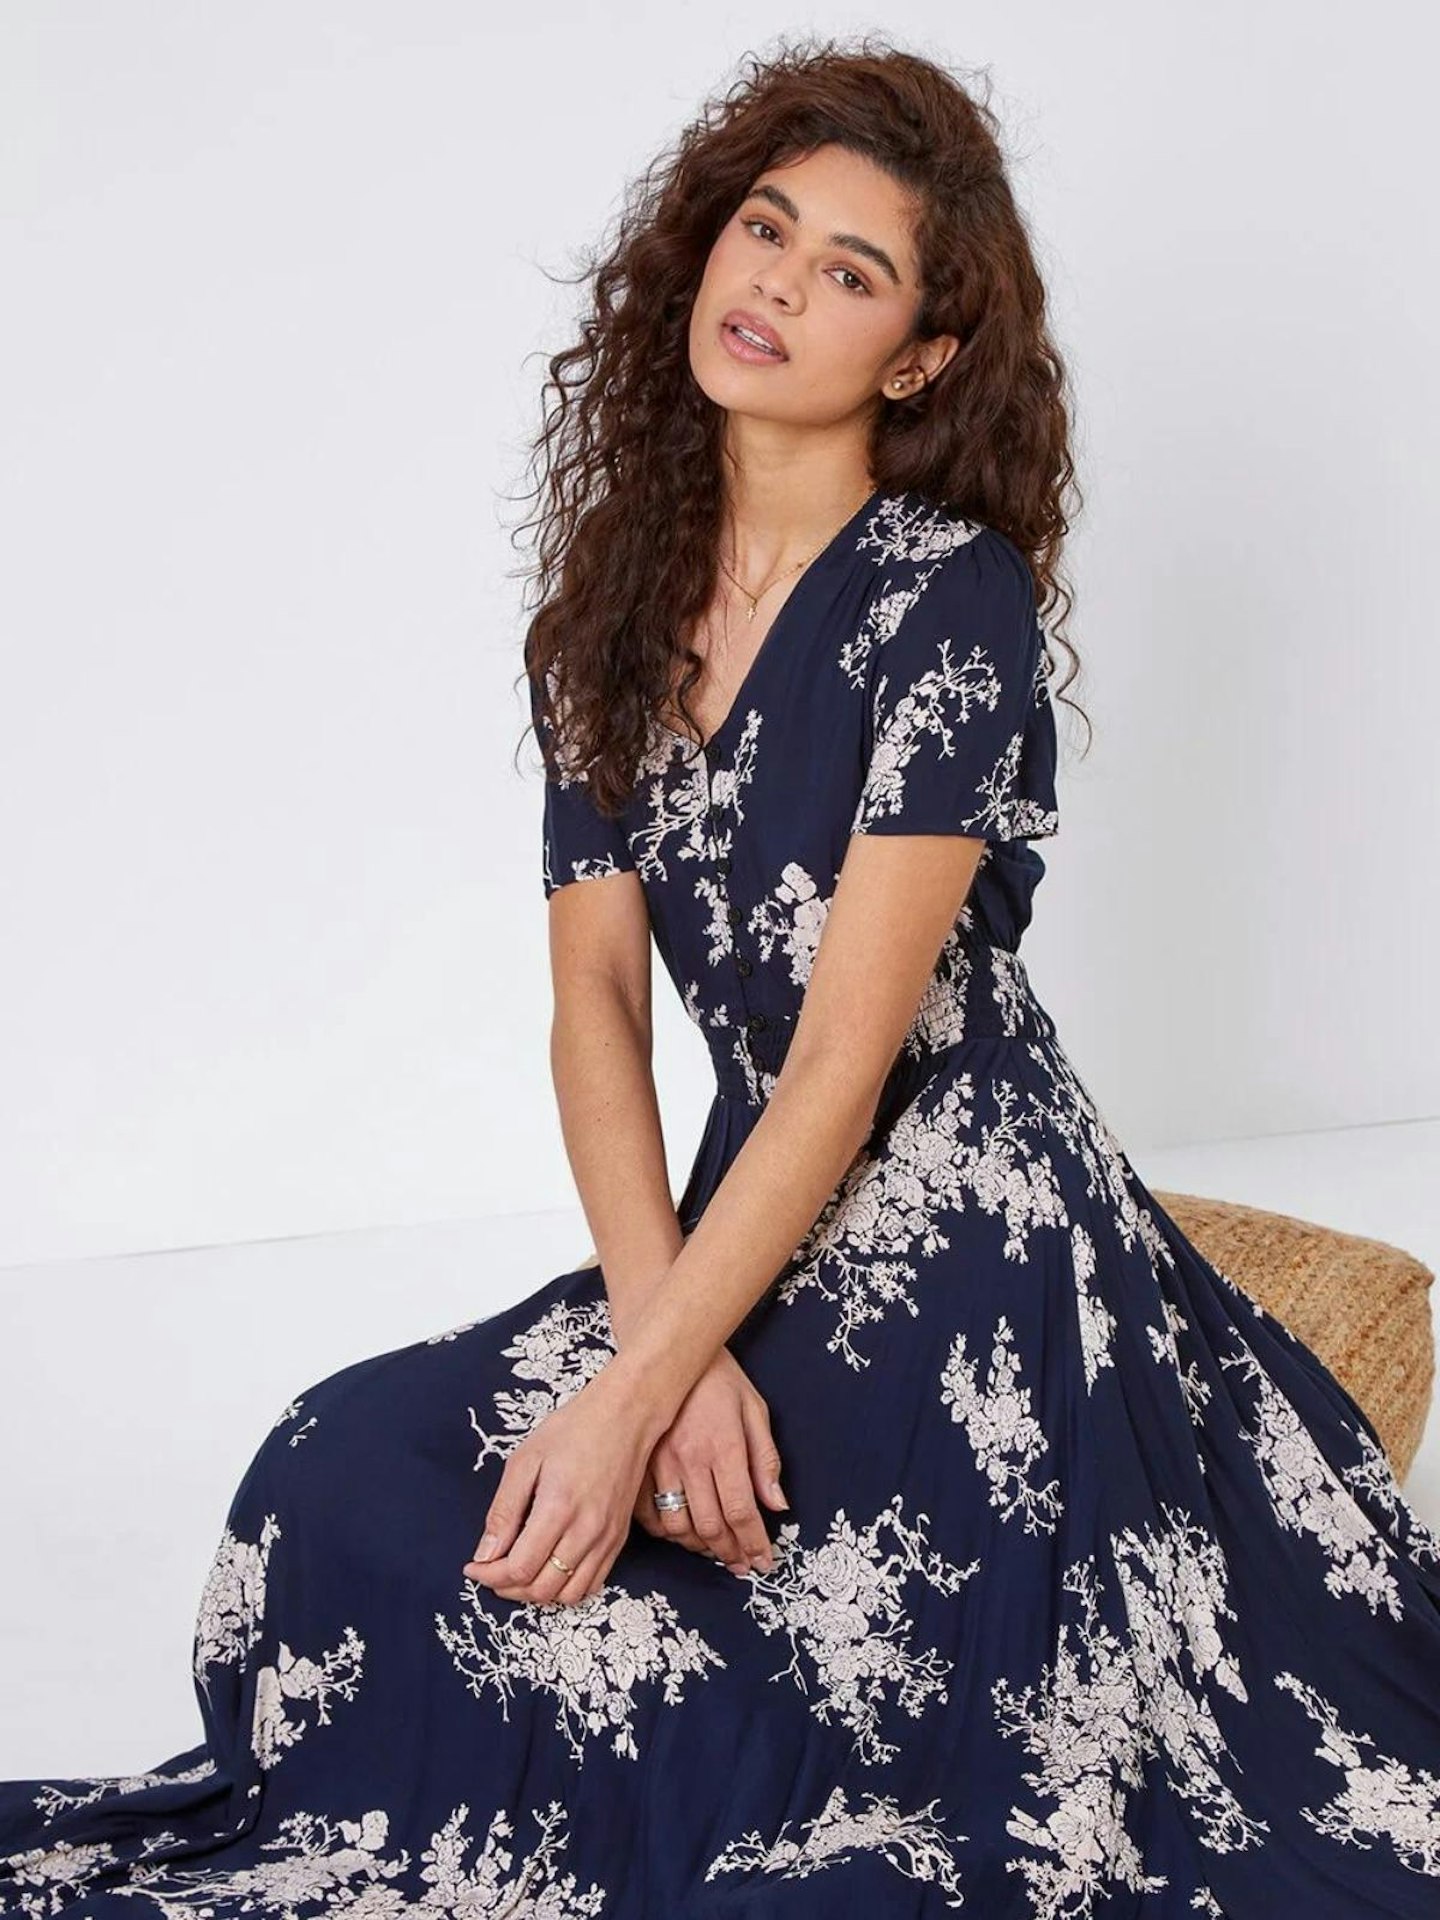 Sophie Wessex is ready for summer in floral maxi dress